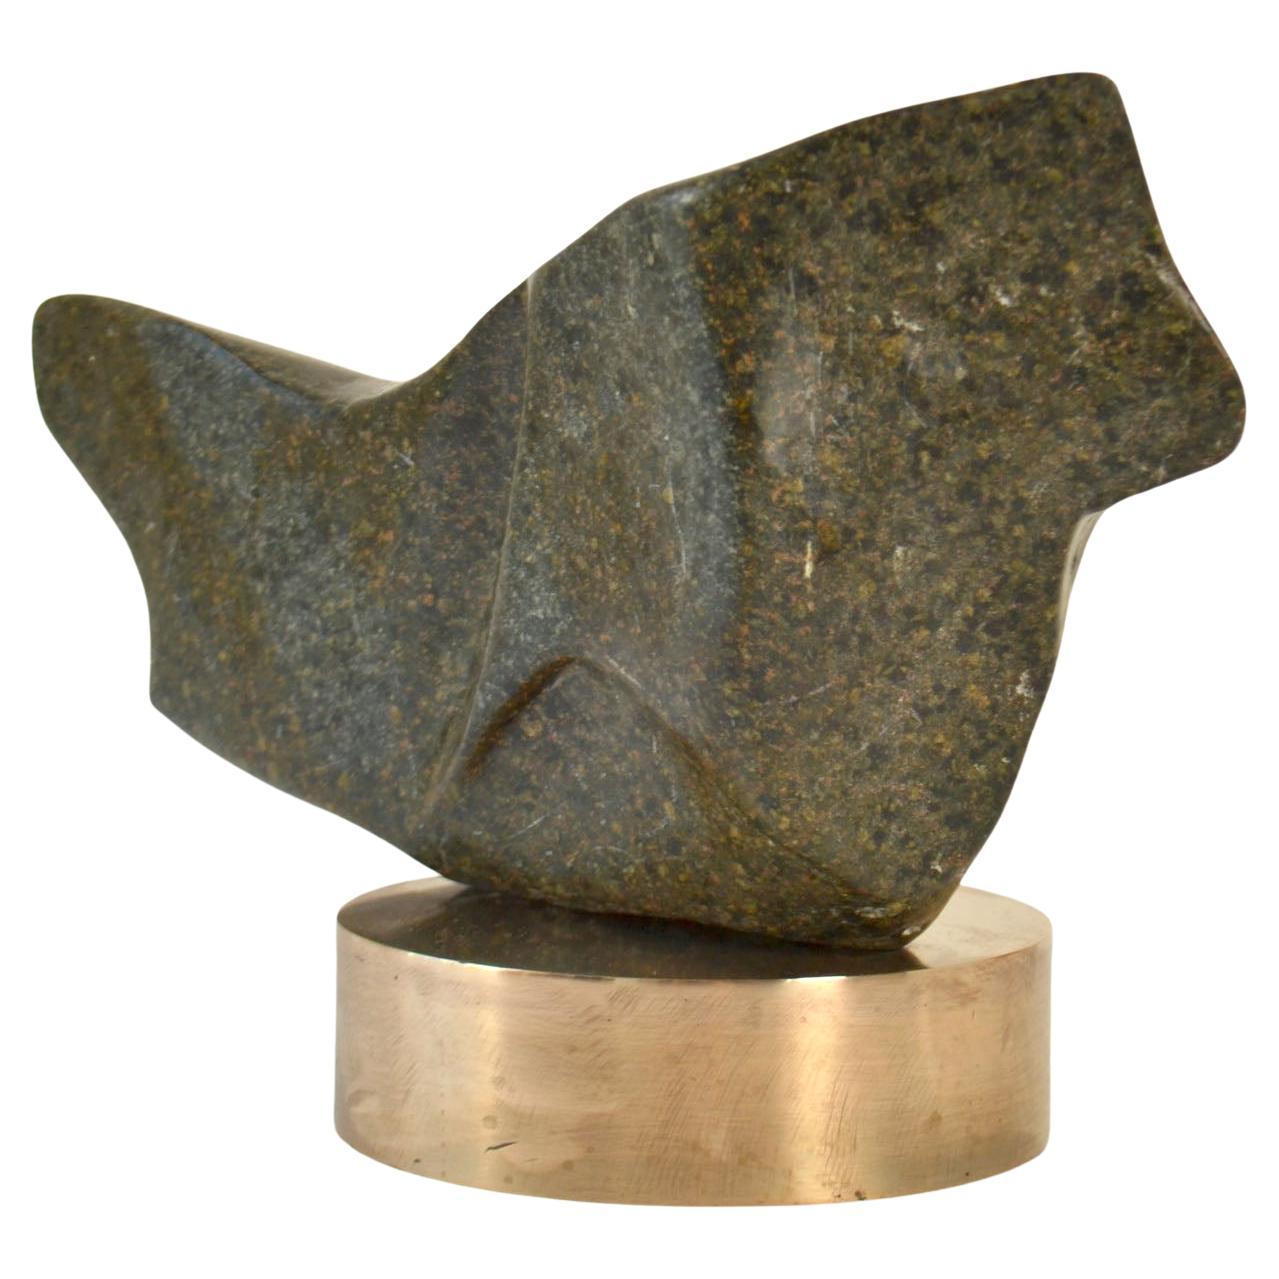 Hand-carved sculpture in moss green marble / granite on a polished round bronze plinth by the late Alice Ward. Her sculpture echoes a voyage of discovery in not just the visible natural world of rocks and landscape with her exploration of space and